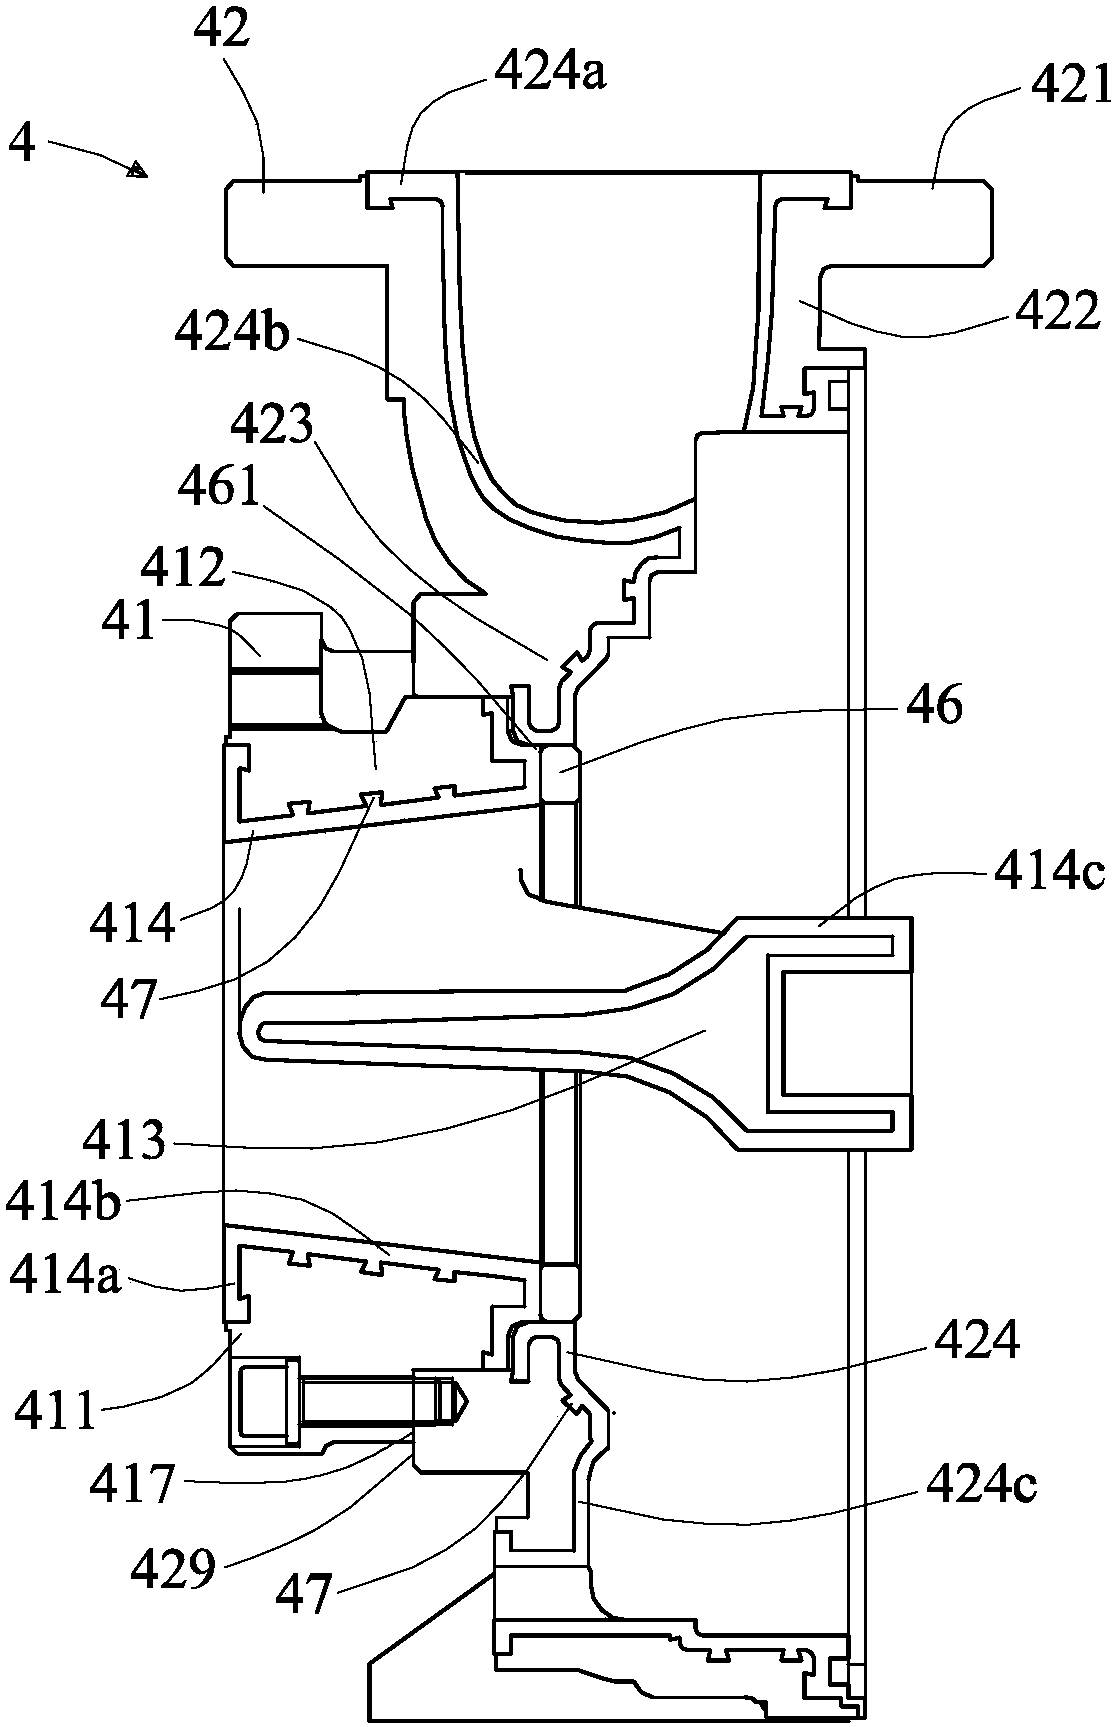 structure of pfa lined pump casing